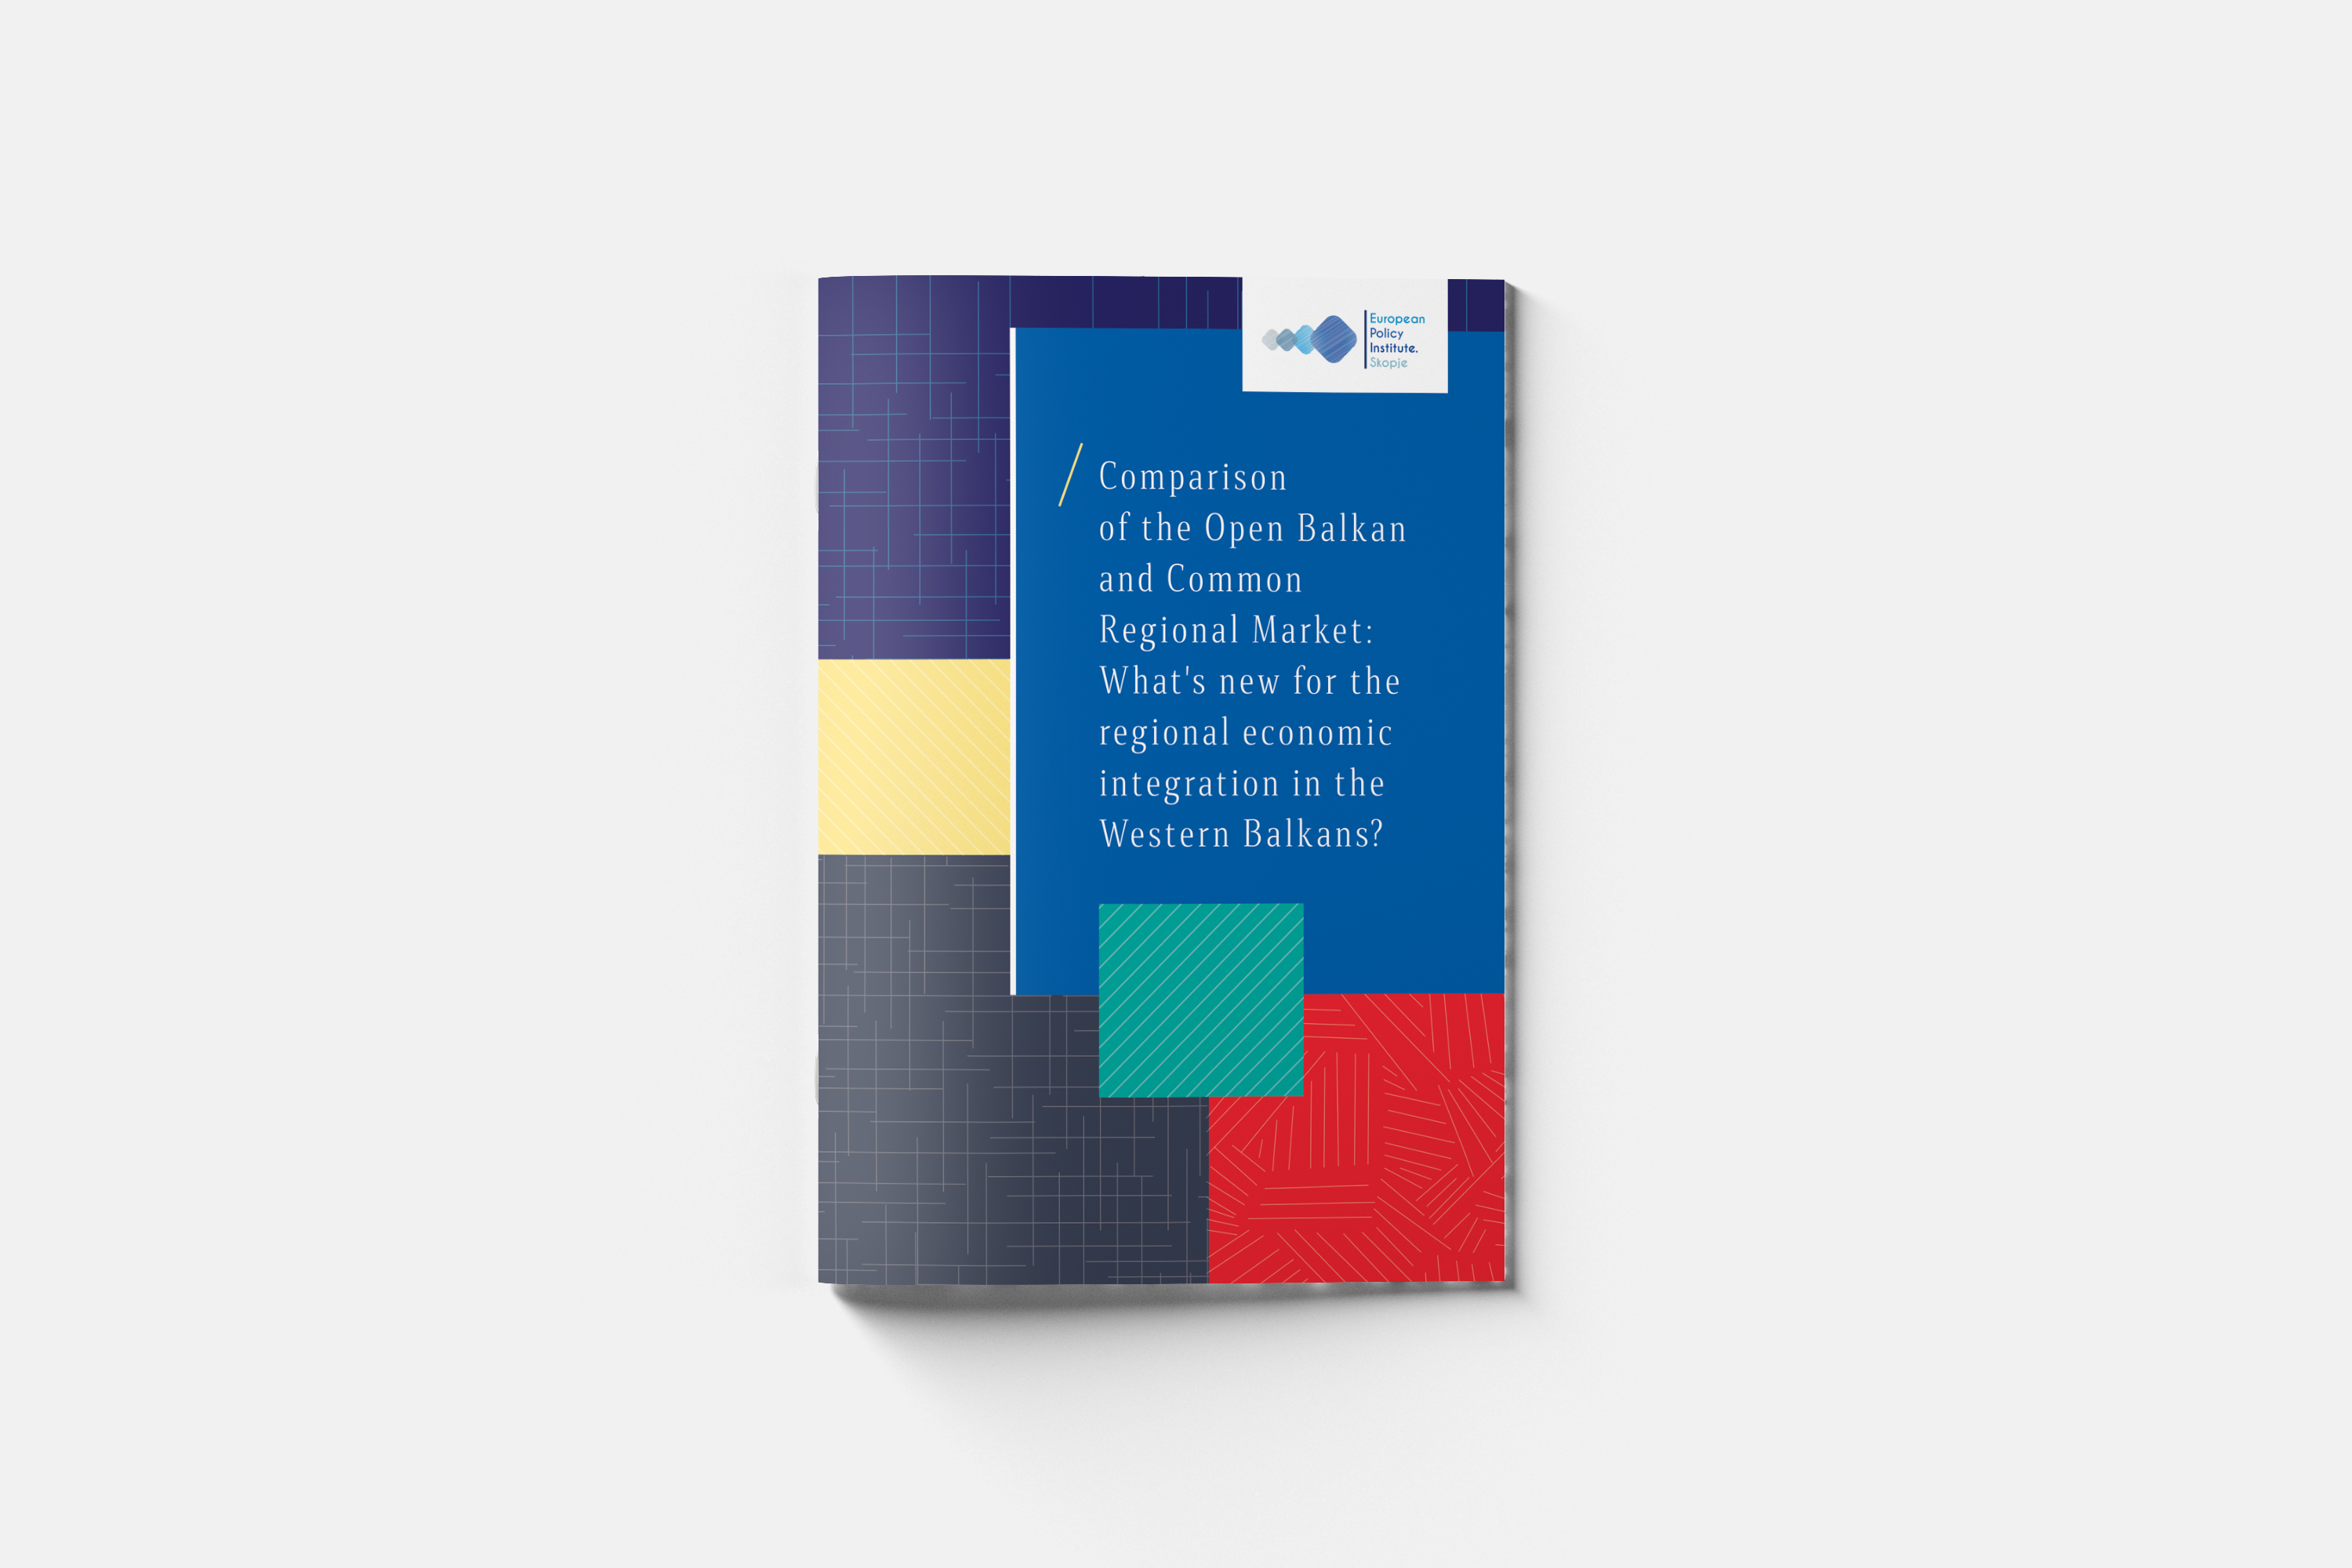 Comparison of the Open Balkan and Common Regional Market: What’s new for the regional economic integration in the Western Balkans?